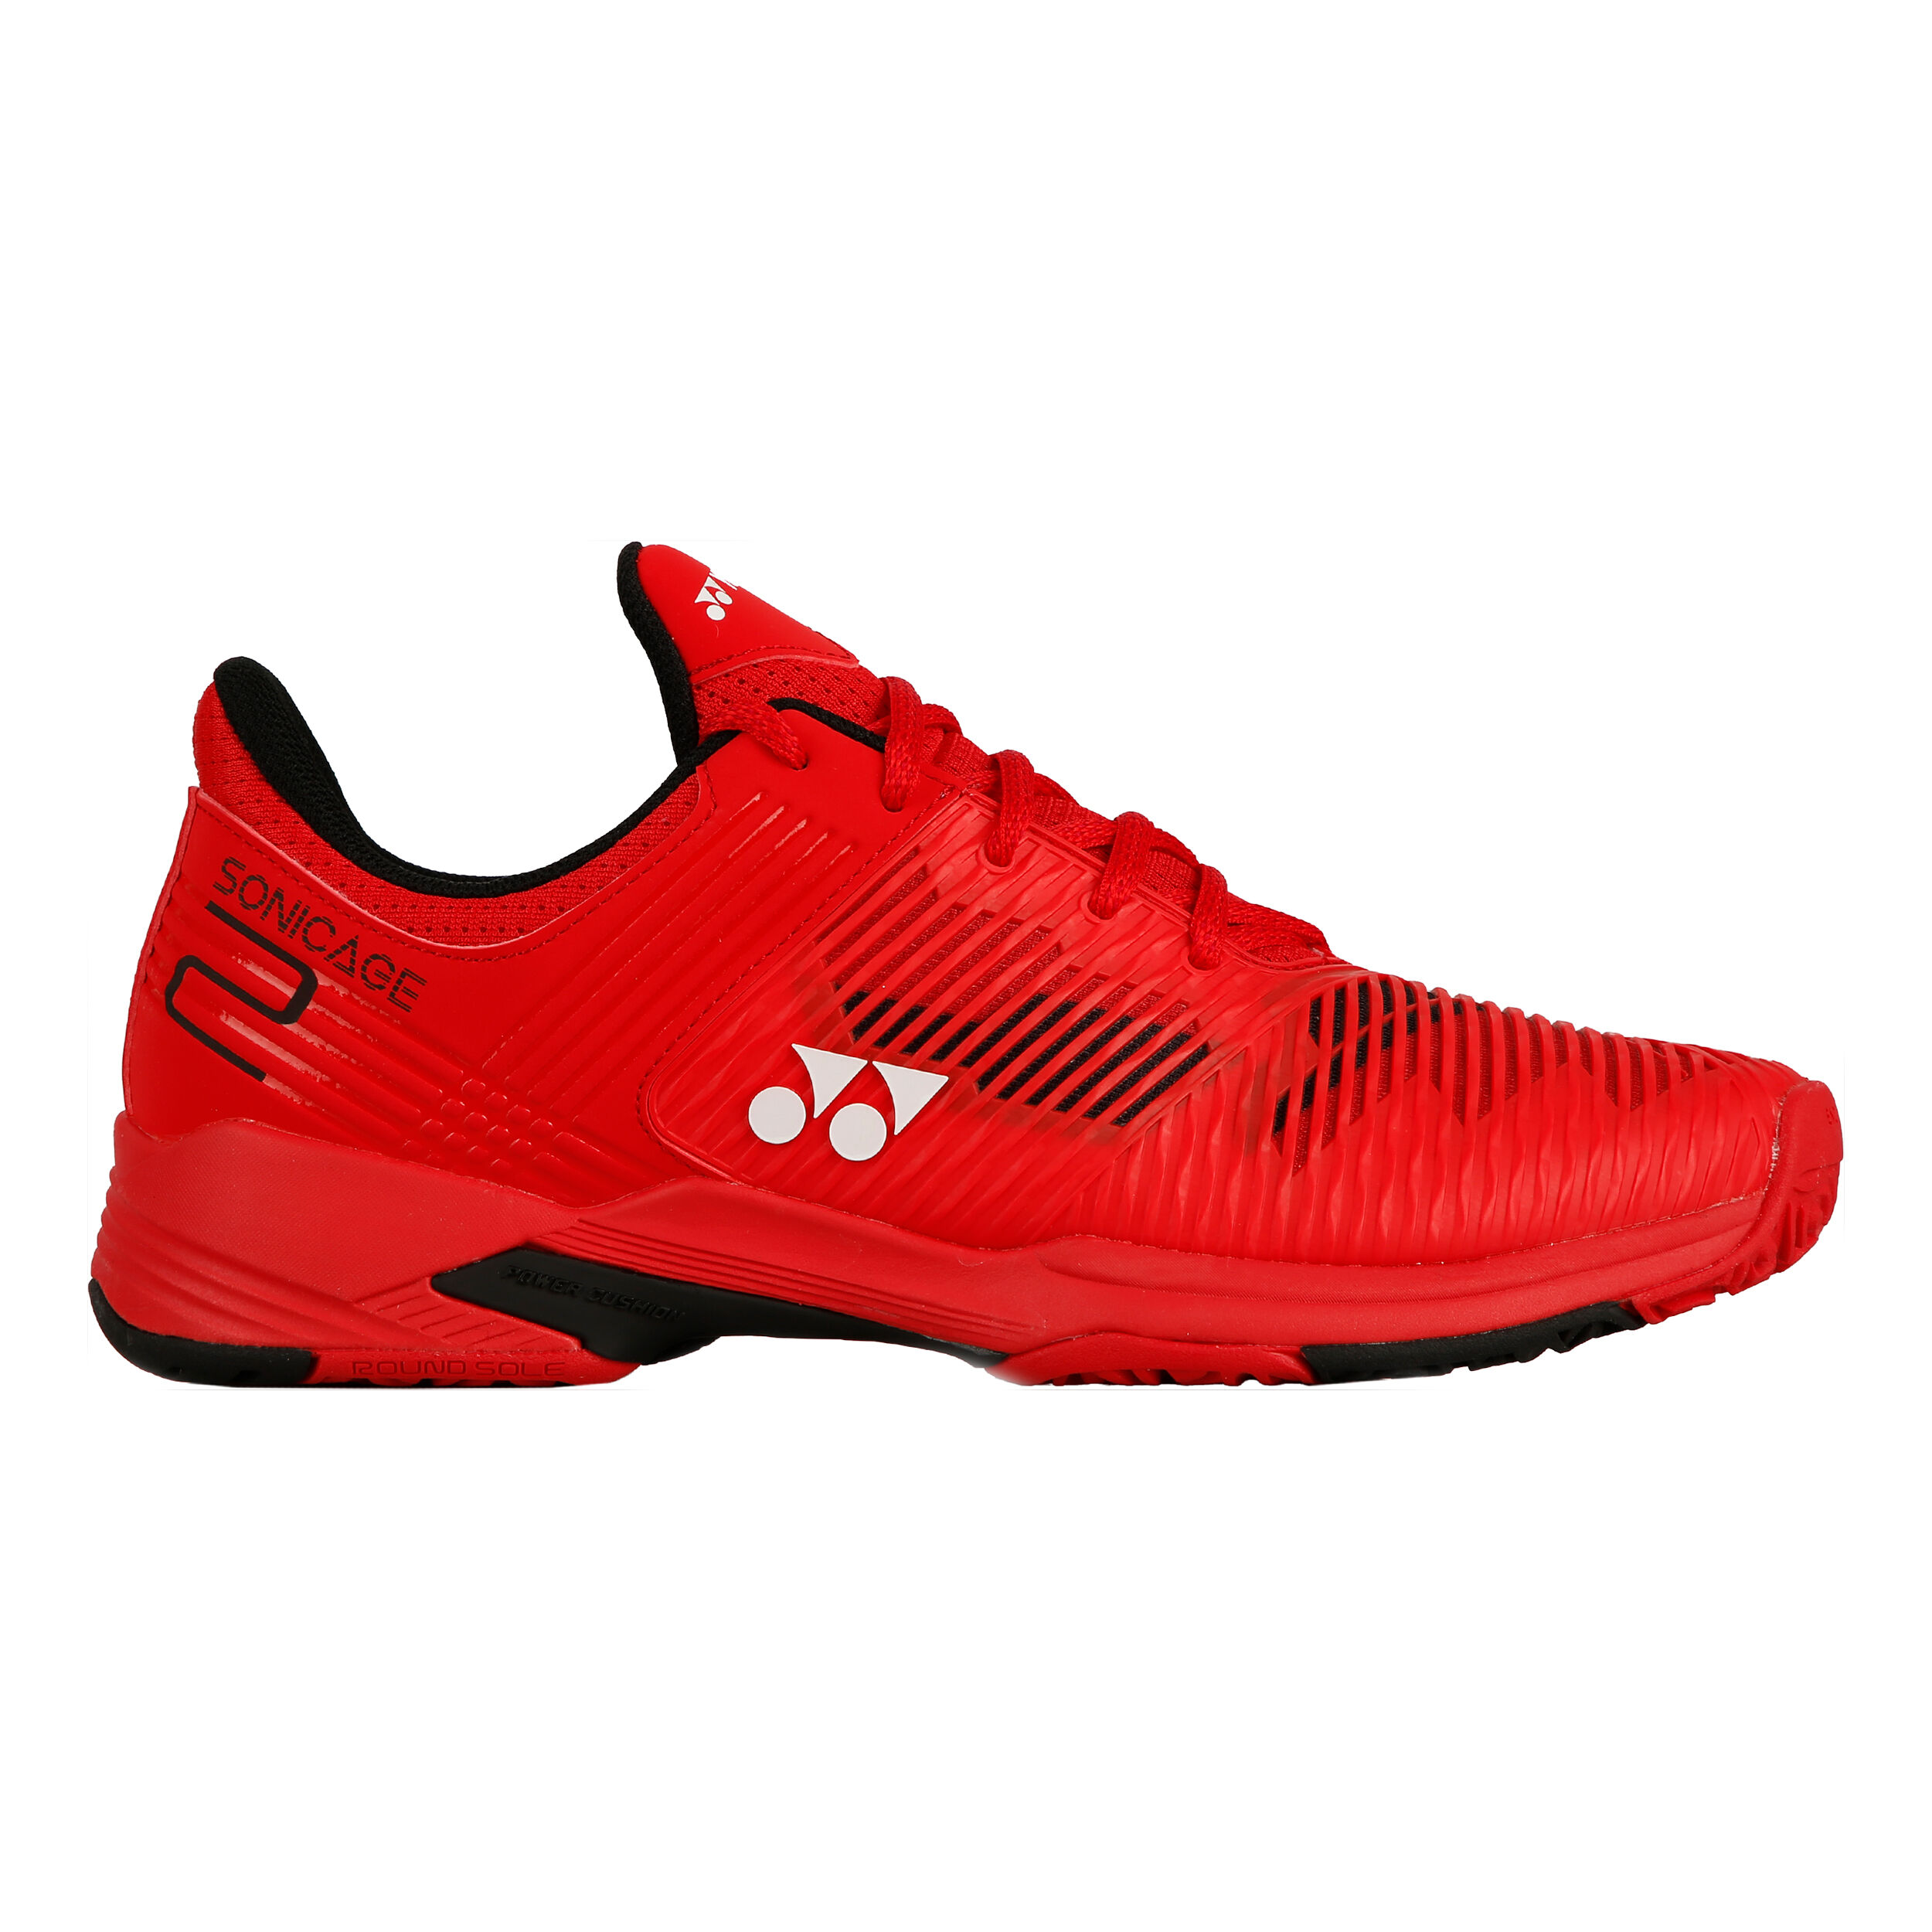 Buy Clay court shoes from Yonex online 